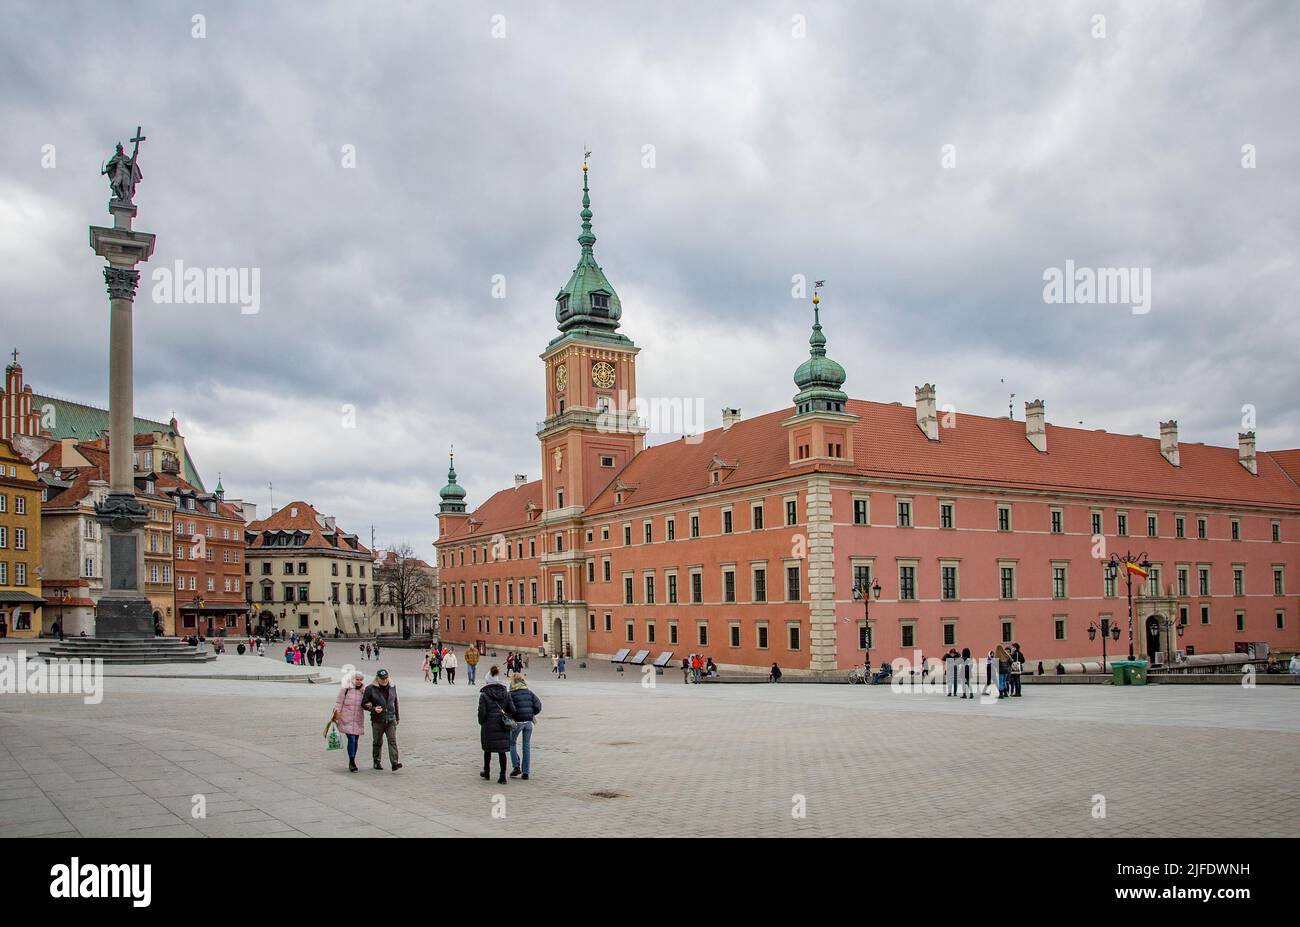 WARSAW, POLAND. MARCH 08, 2022 Royal Castle on the square Stock Photo